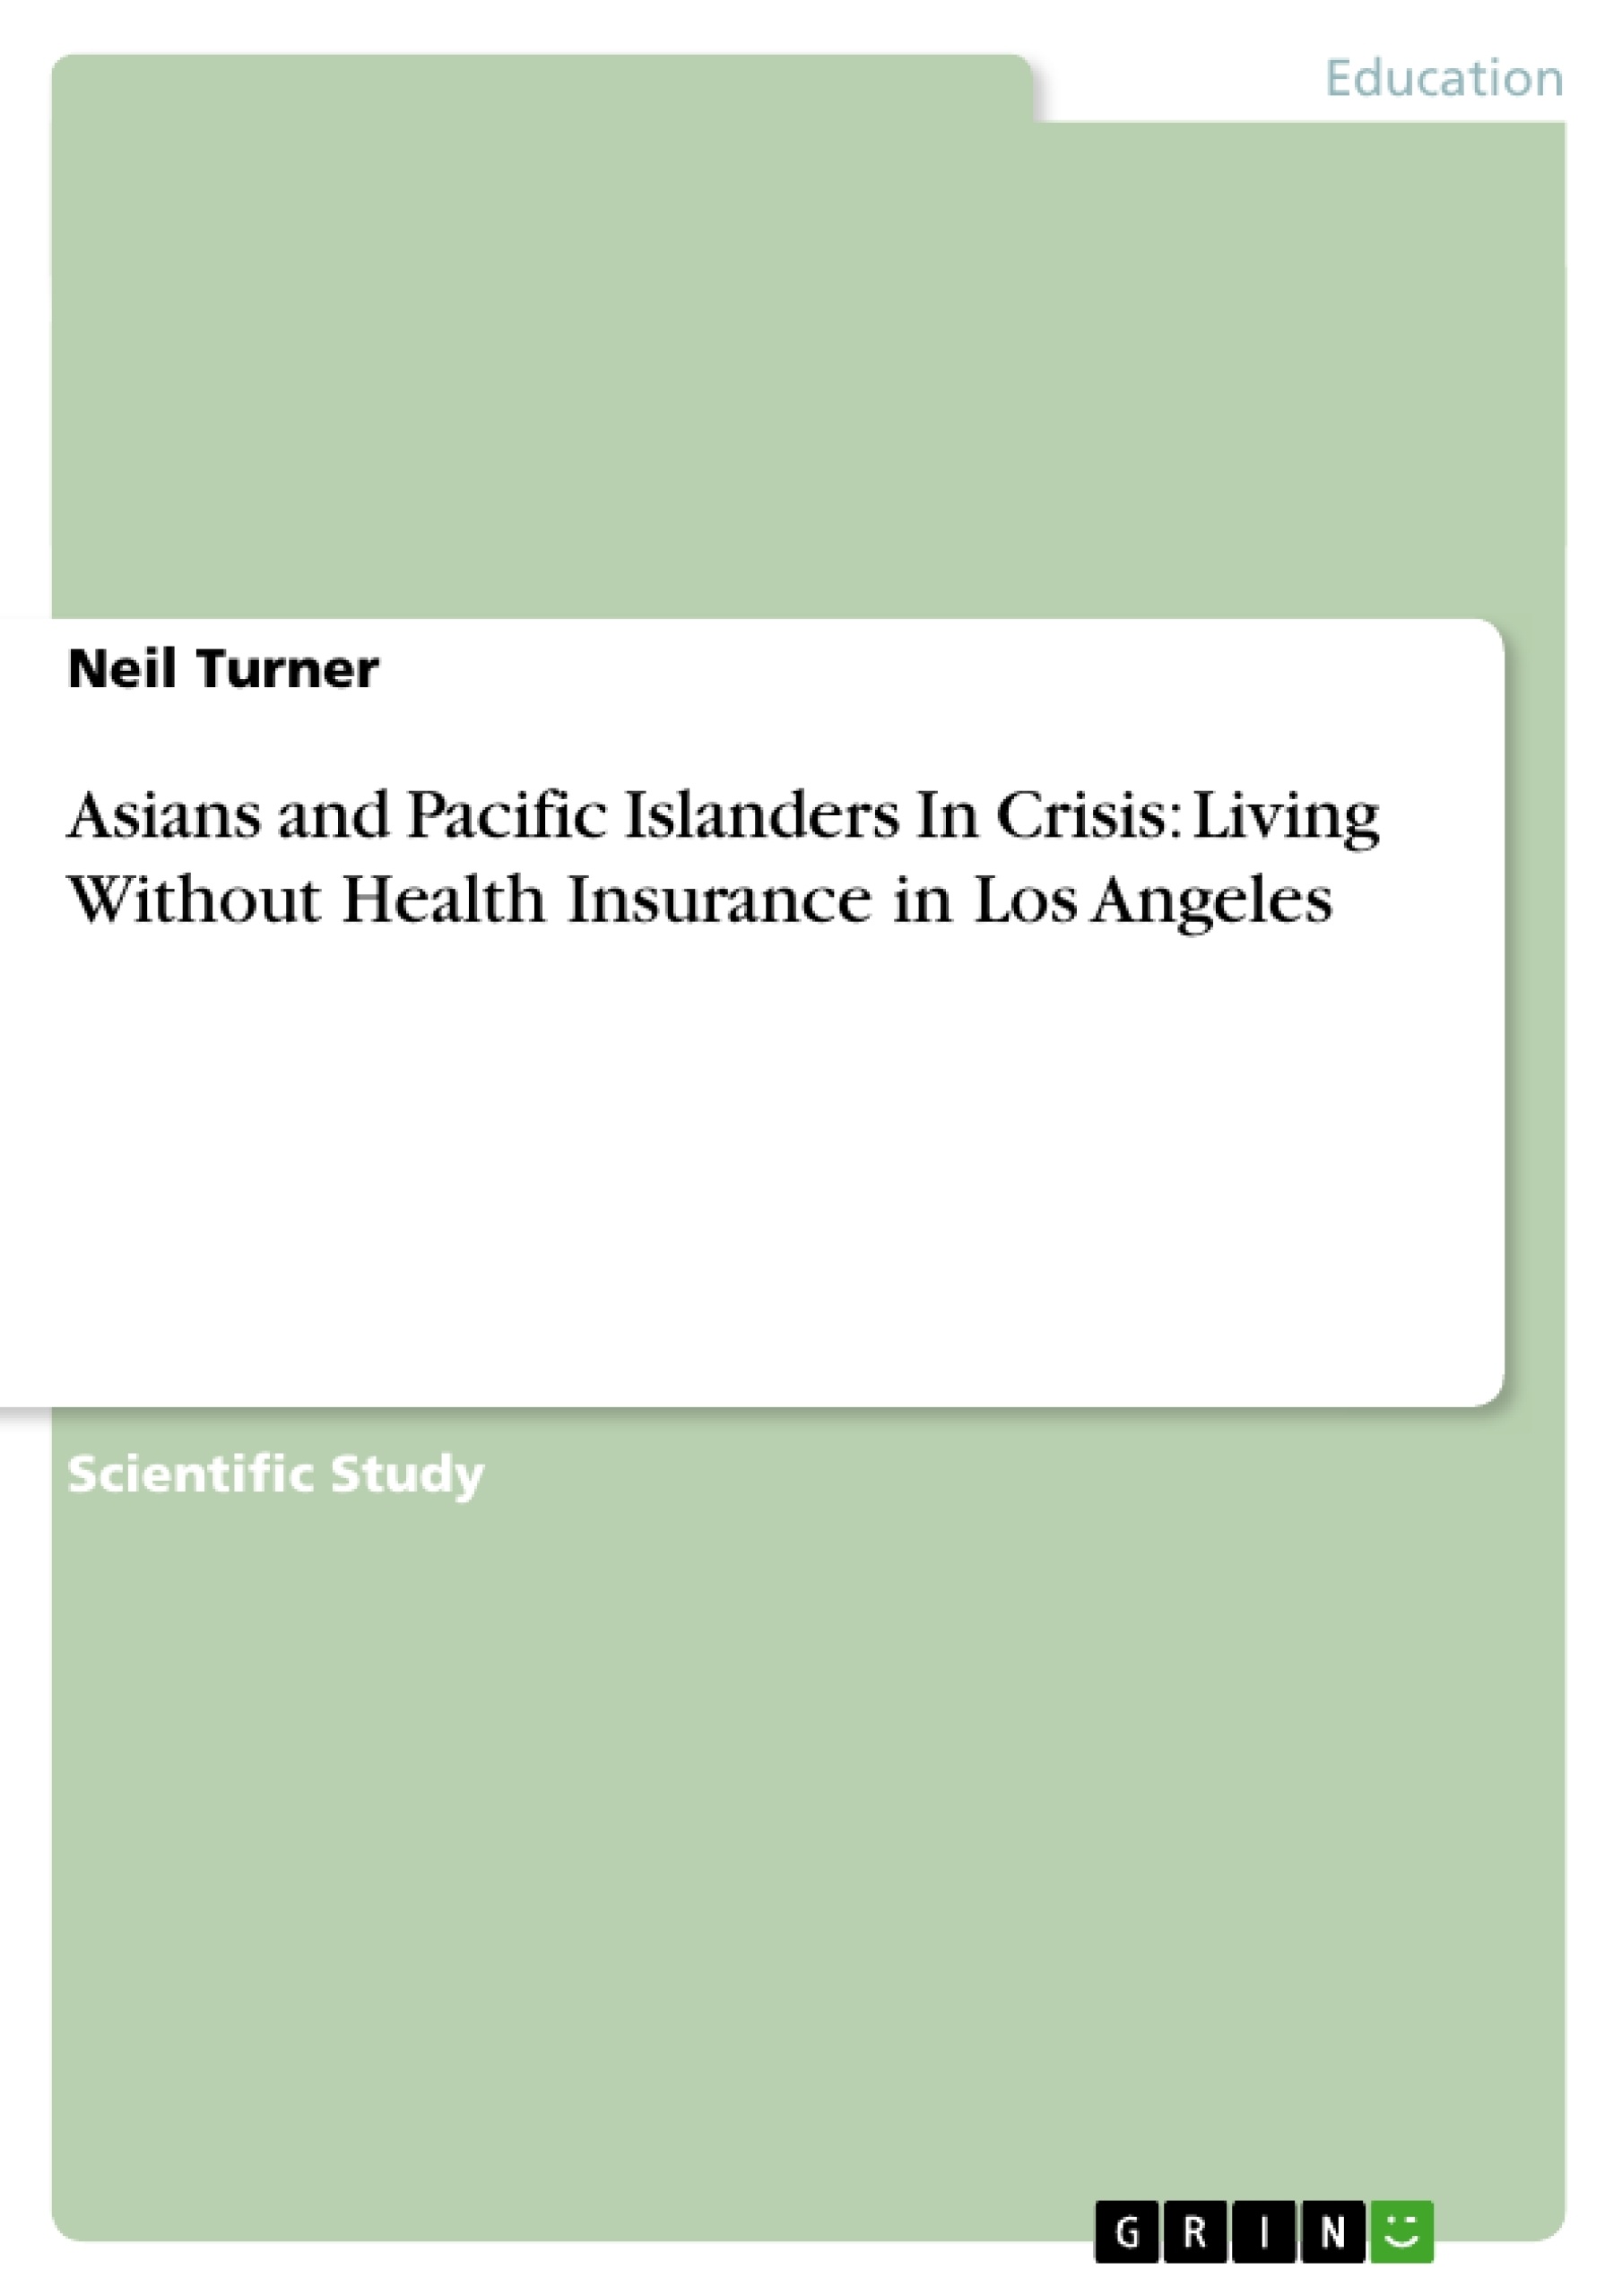 Title: Asians and Pacific Islanders In Crisis: Living Without Health Insurance in Los Angeles